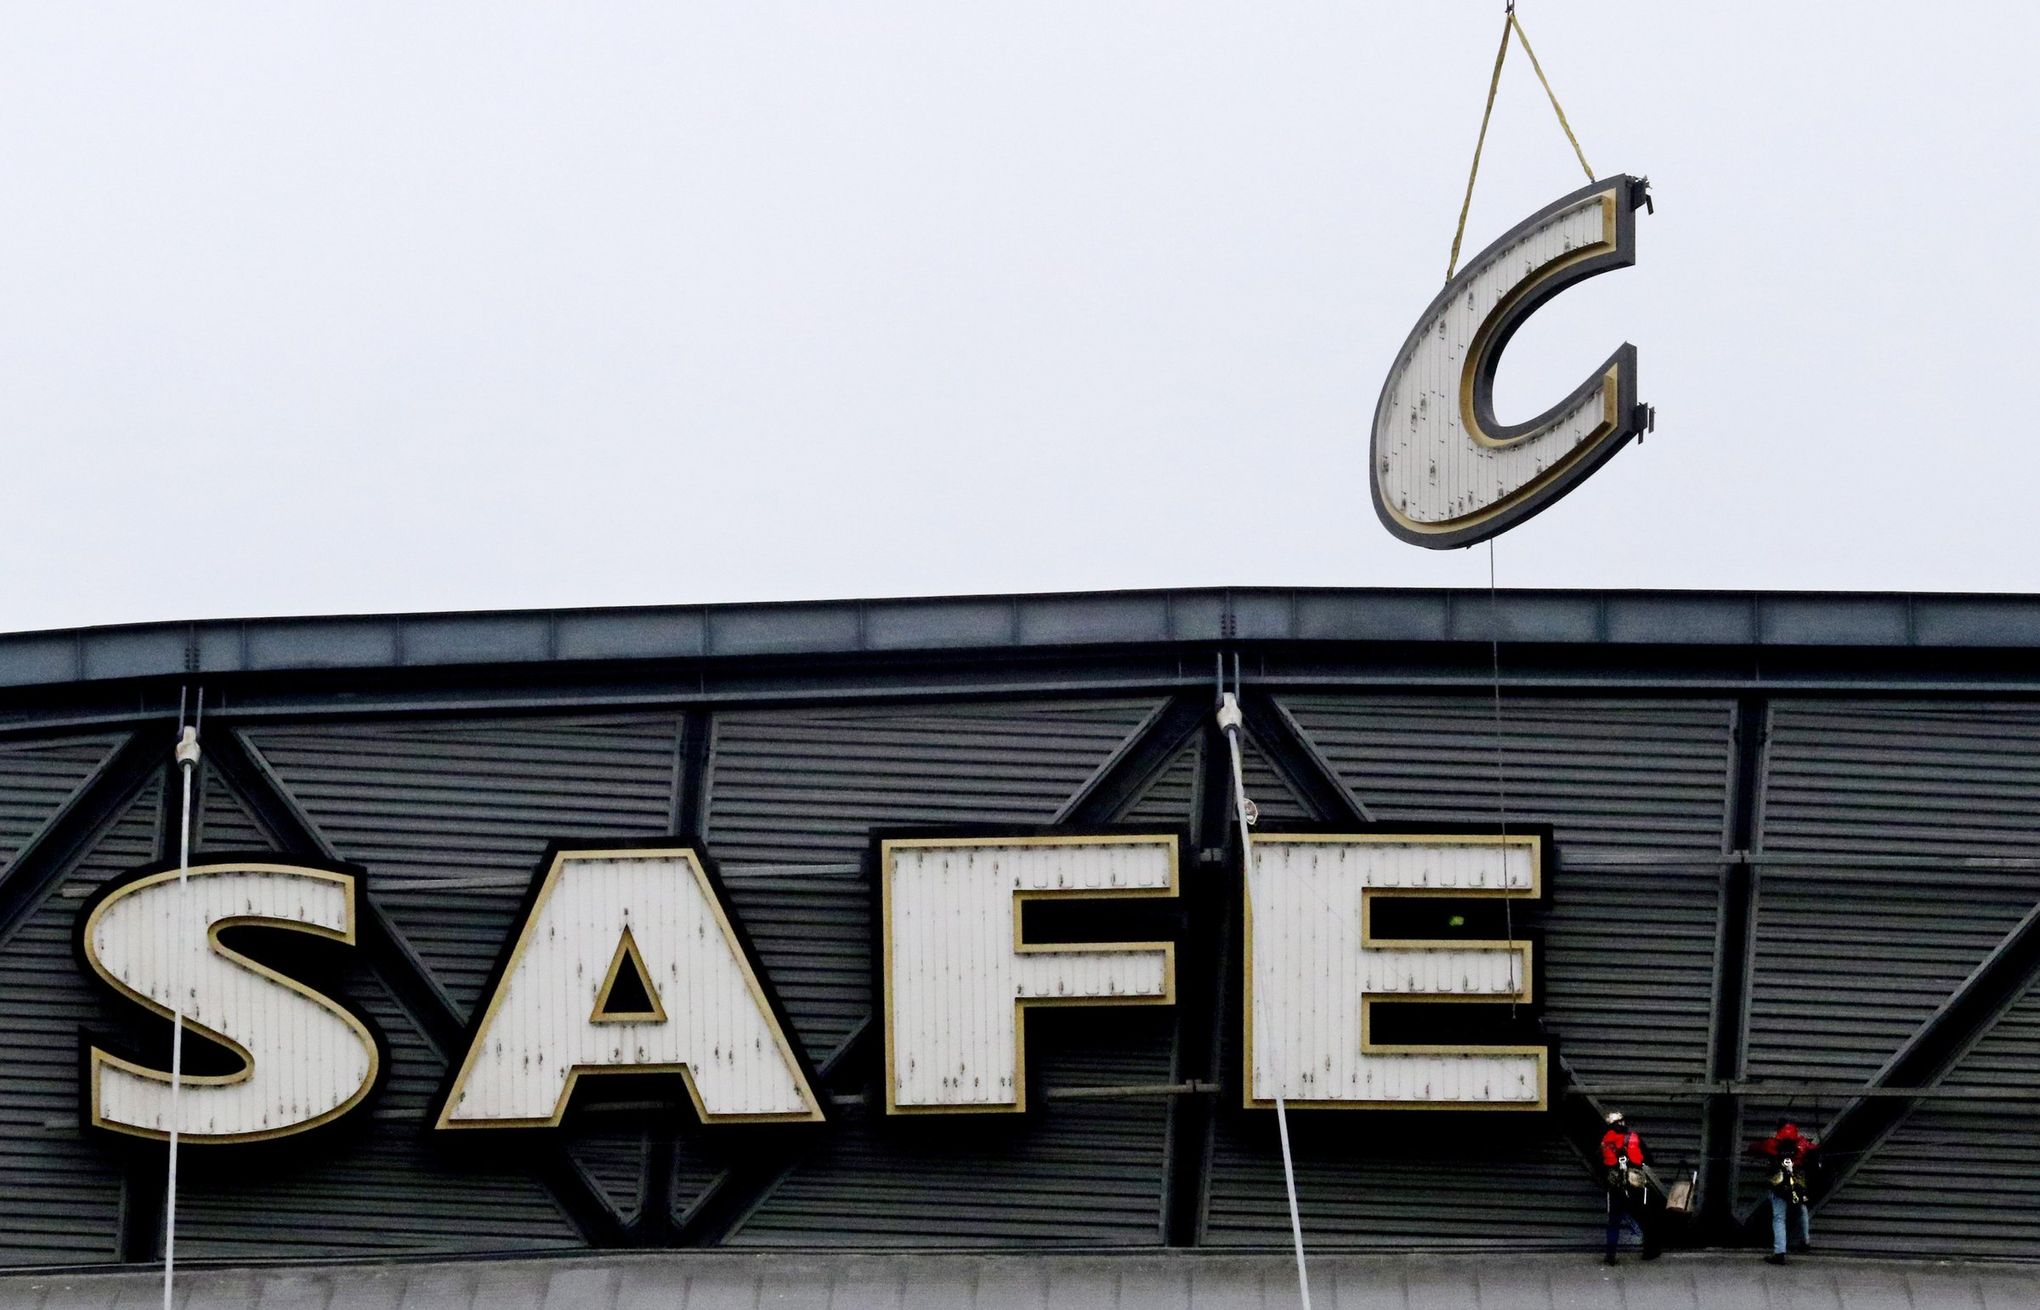 Safeco Field — Something To Write Home About